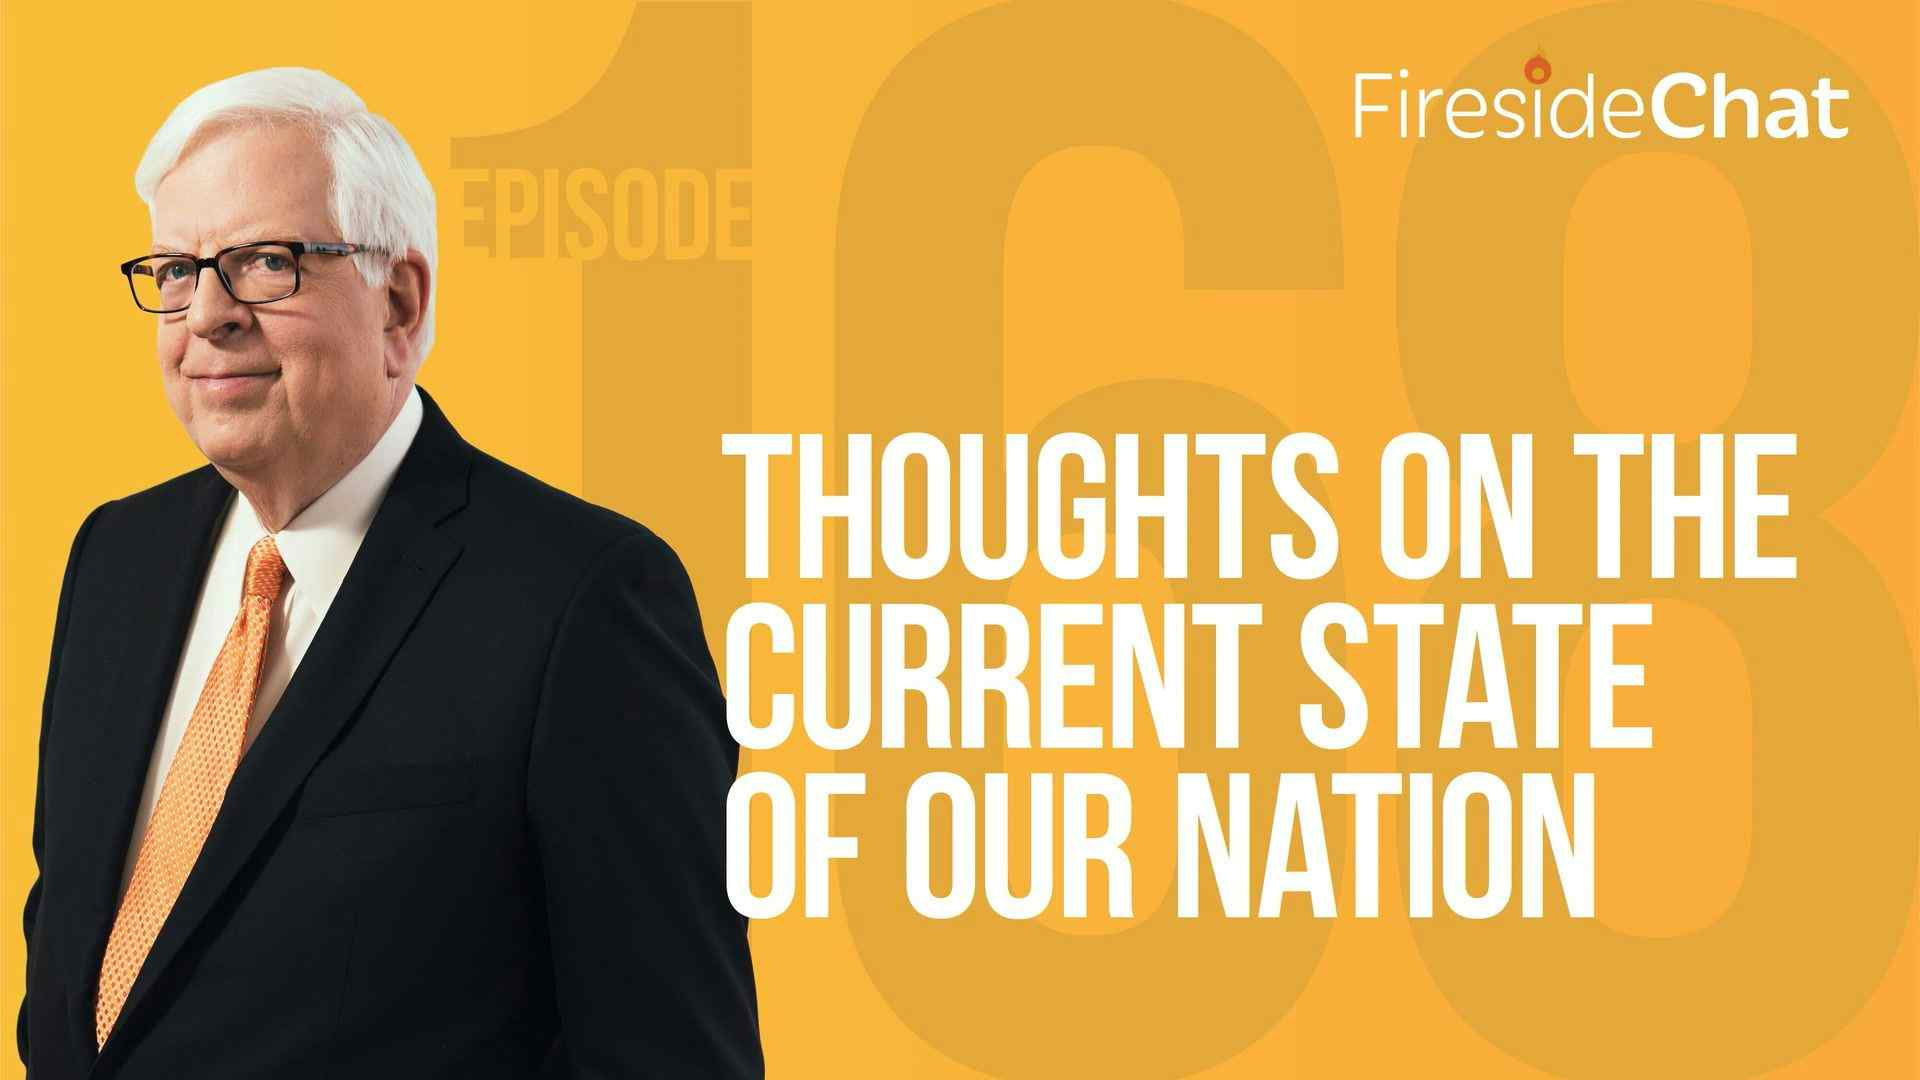 Ep. 168 — Thoughts on the Current State of Our Nation